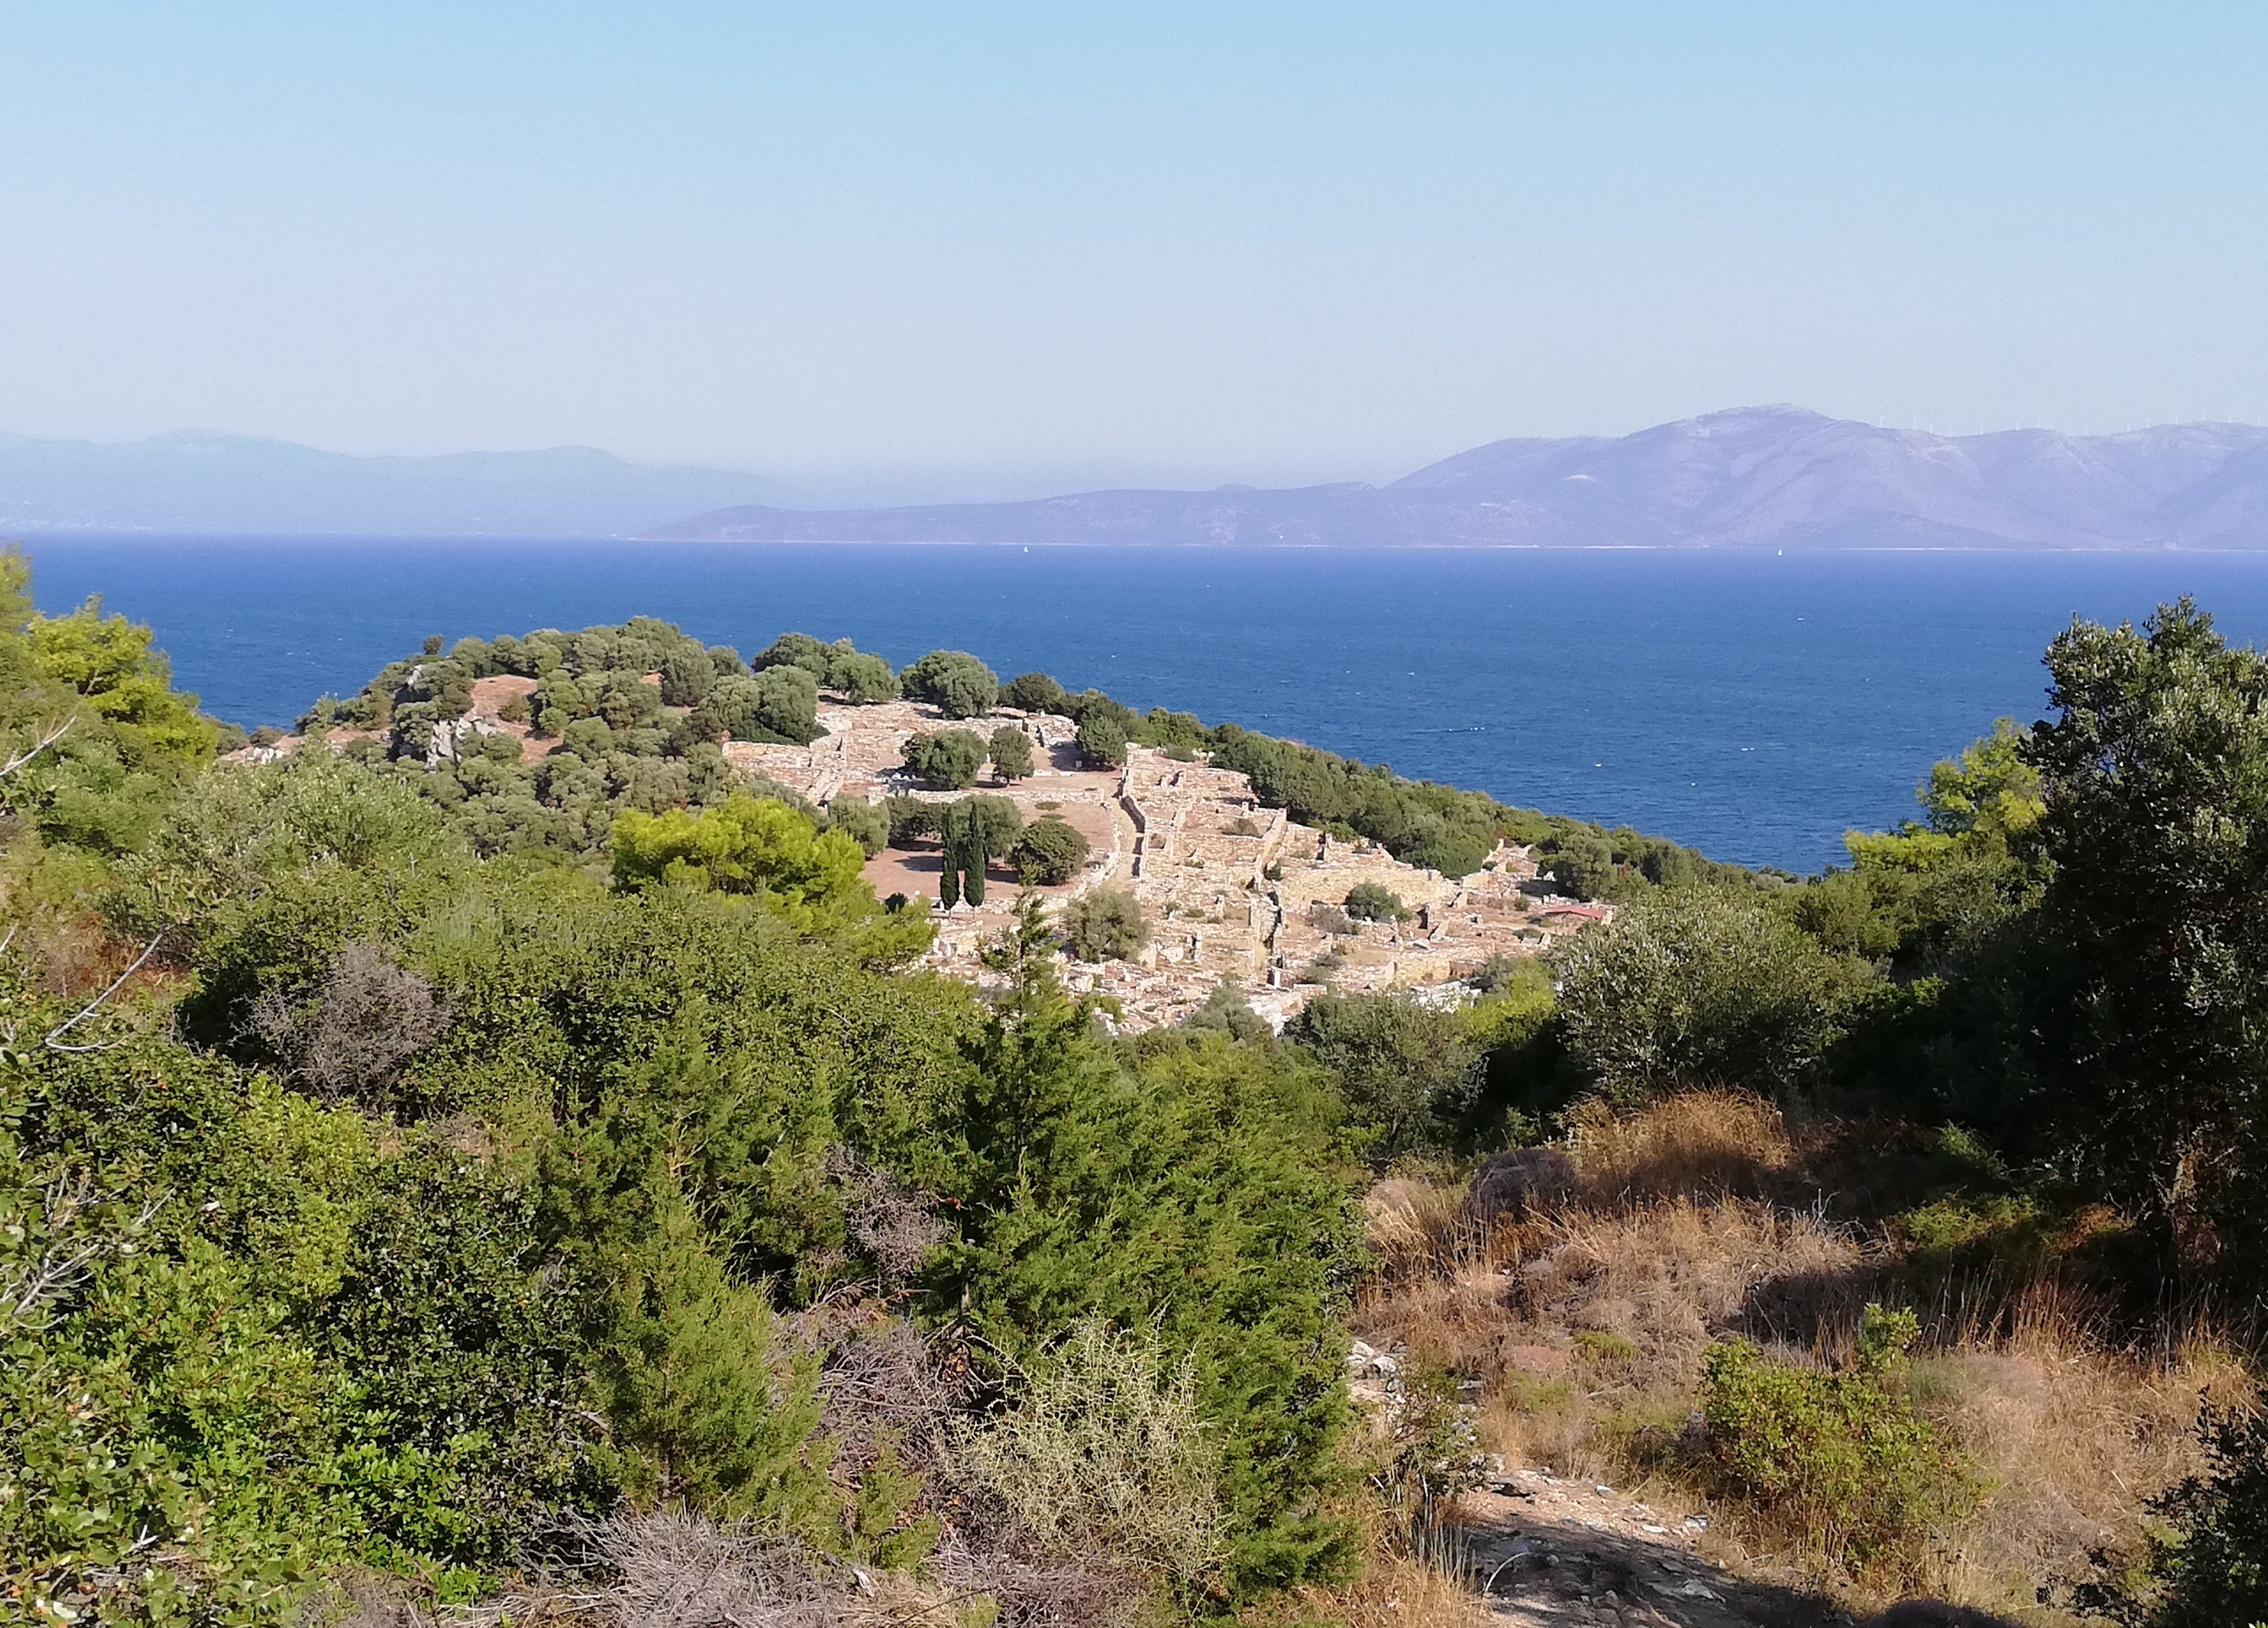 Panoramic view of the ancient fortress and town of Rhamnous